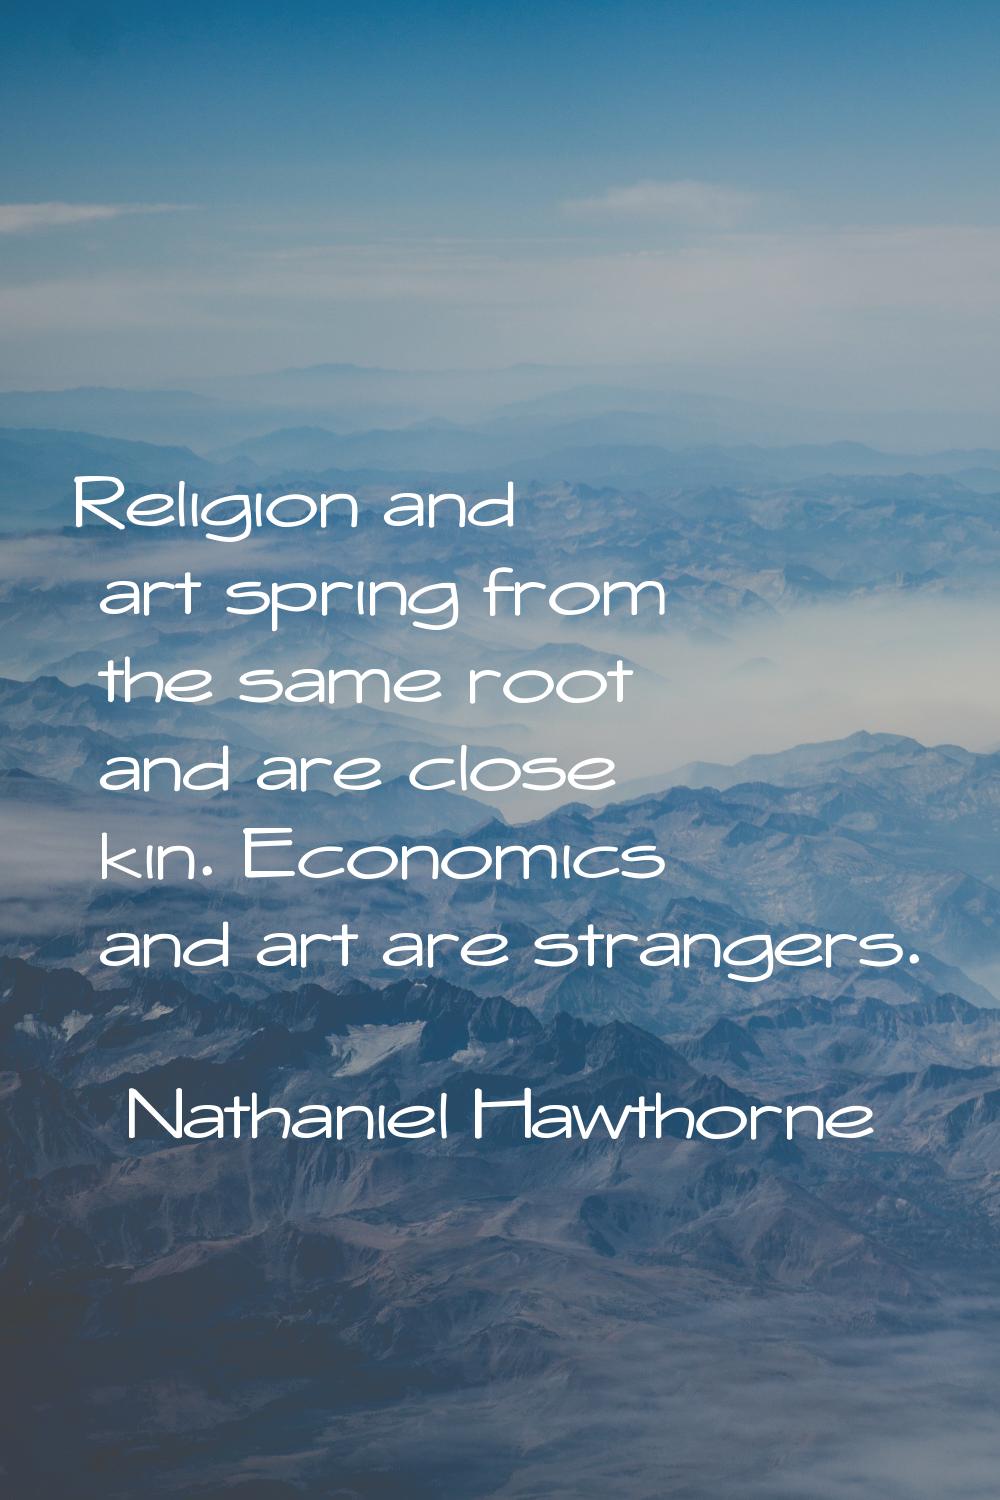 Religion and art spring from the same root and are close kin. Economics and art are strangers.